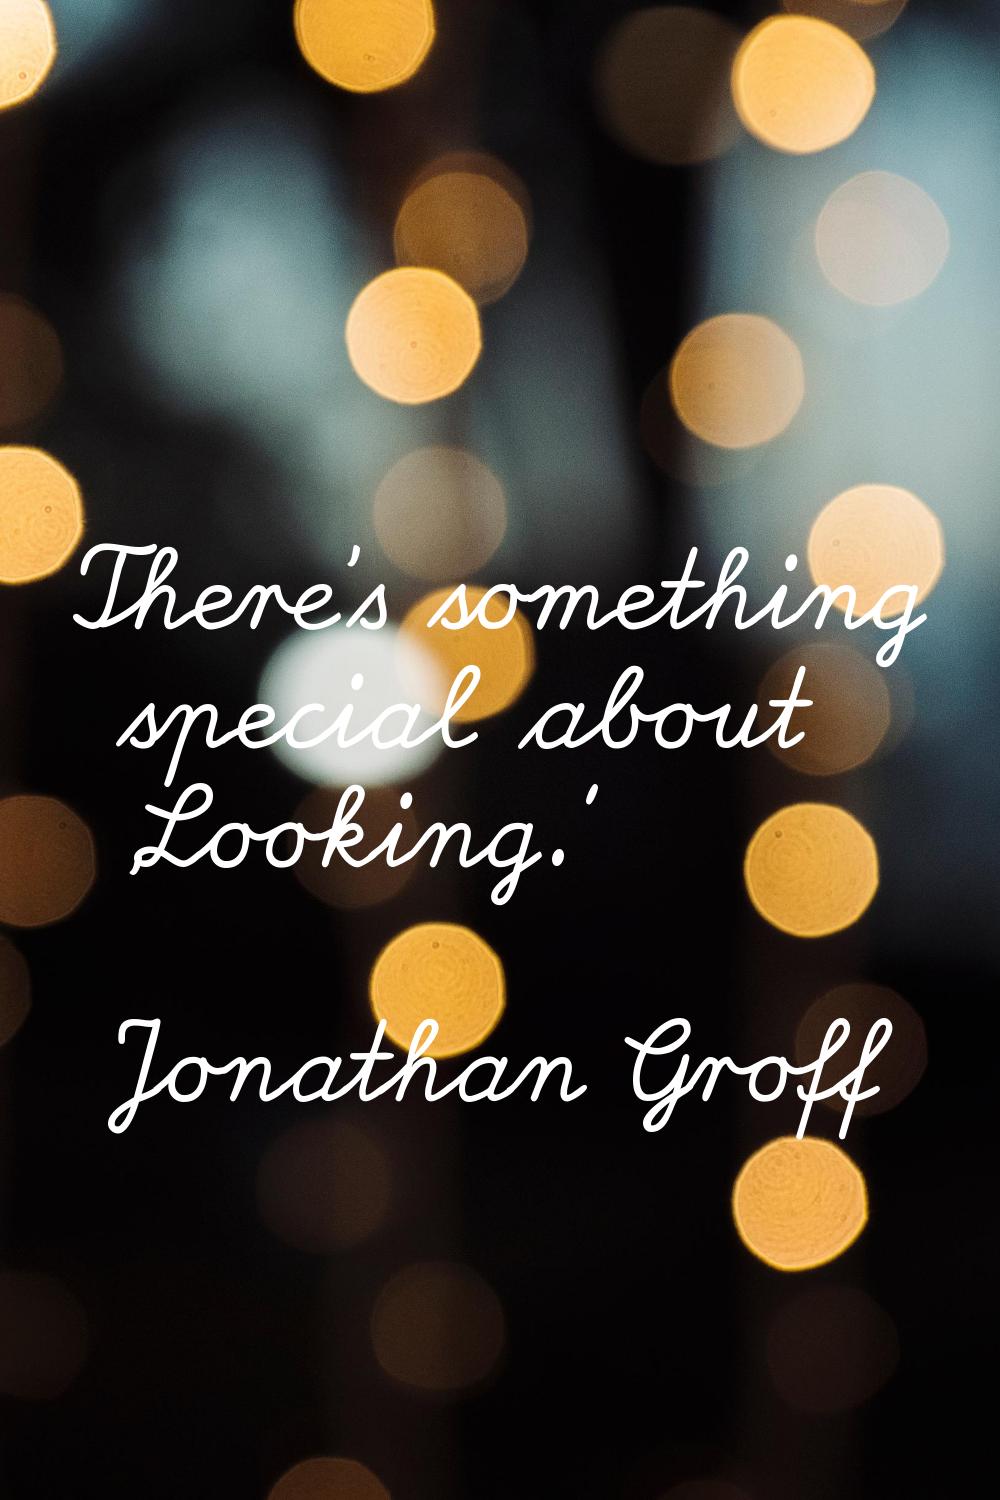 There's something special about 'Looking.'